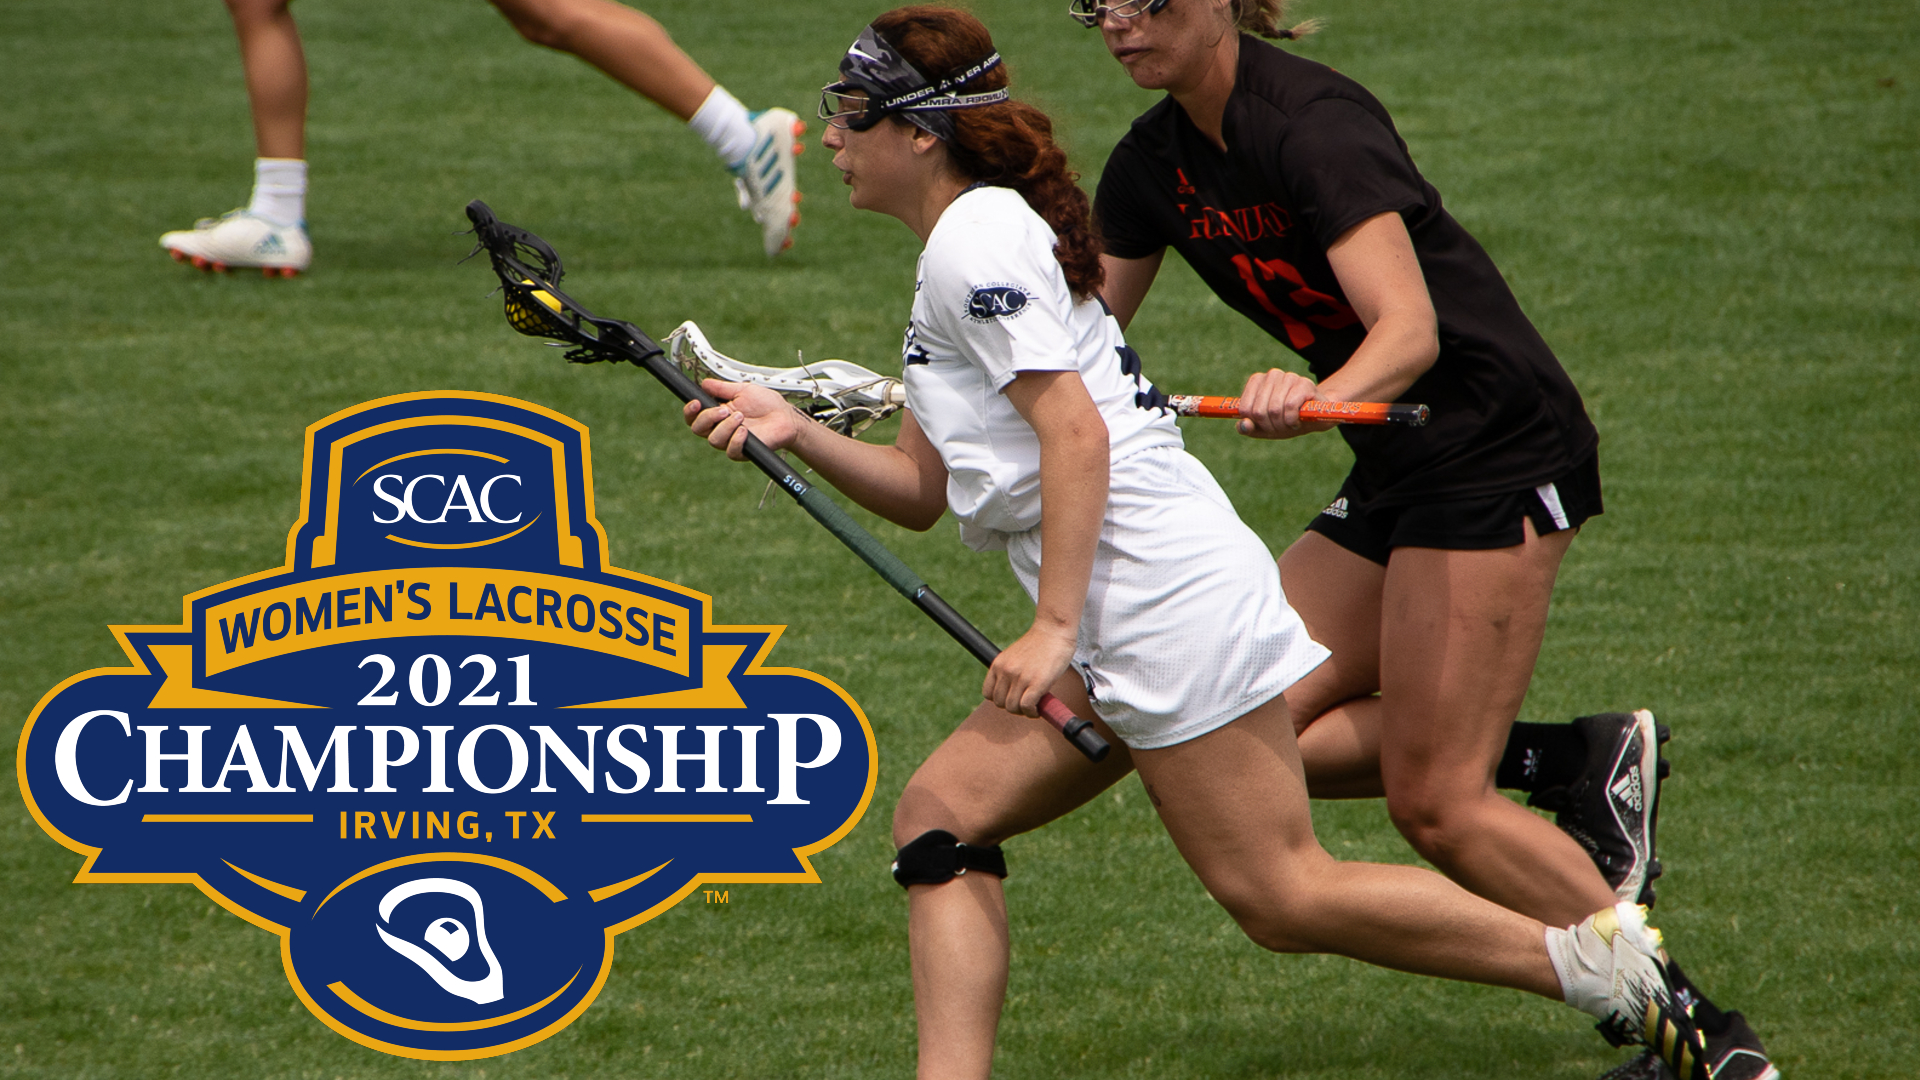 UD Women's Lacrosse to Host 2021 SCAC Tournament